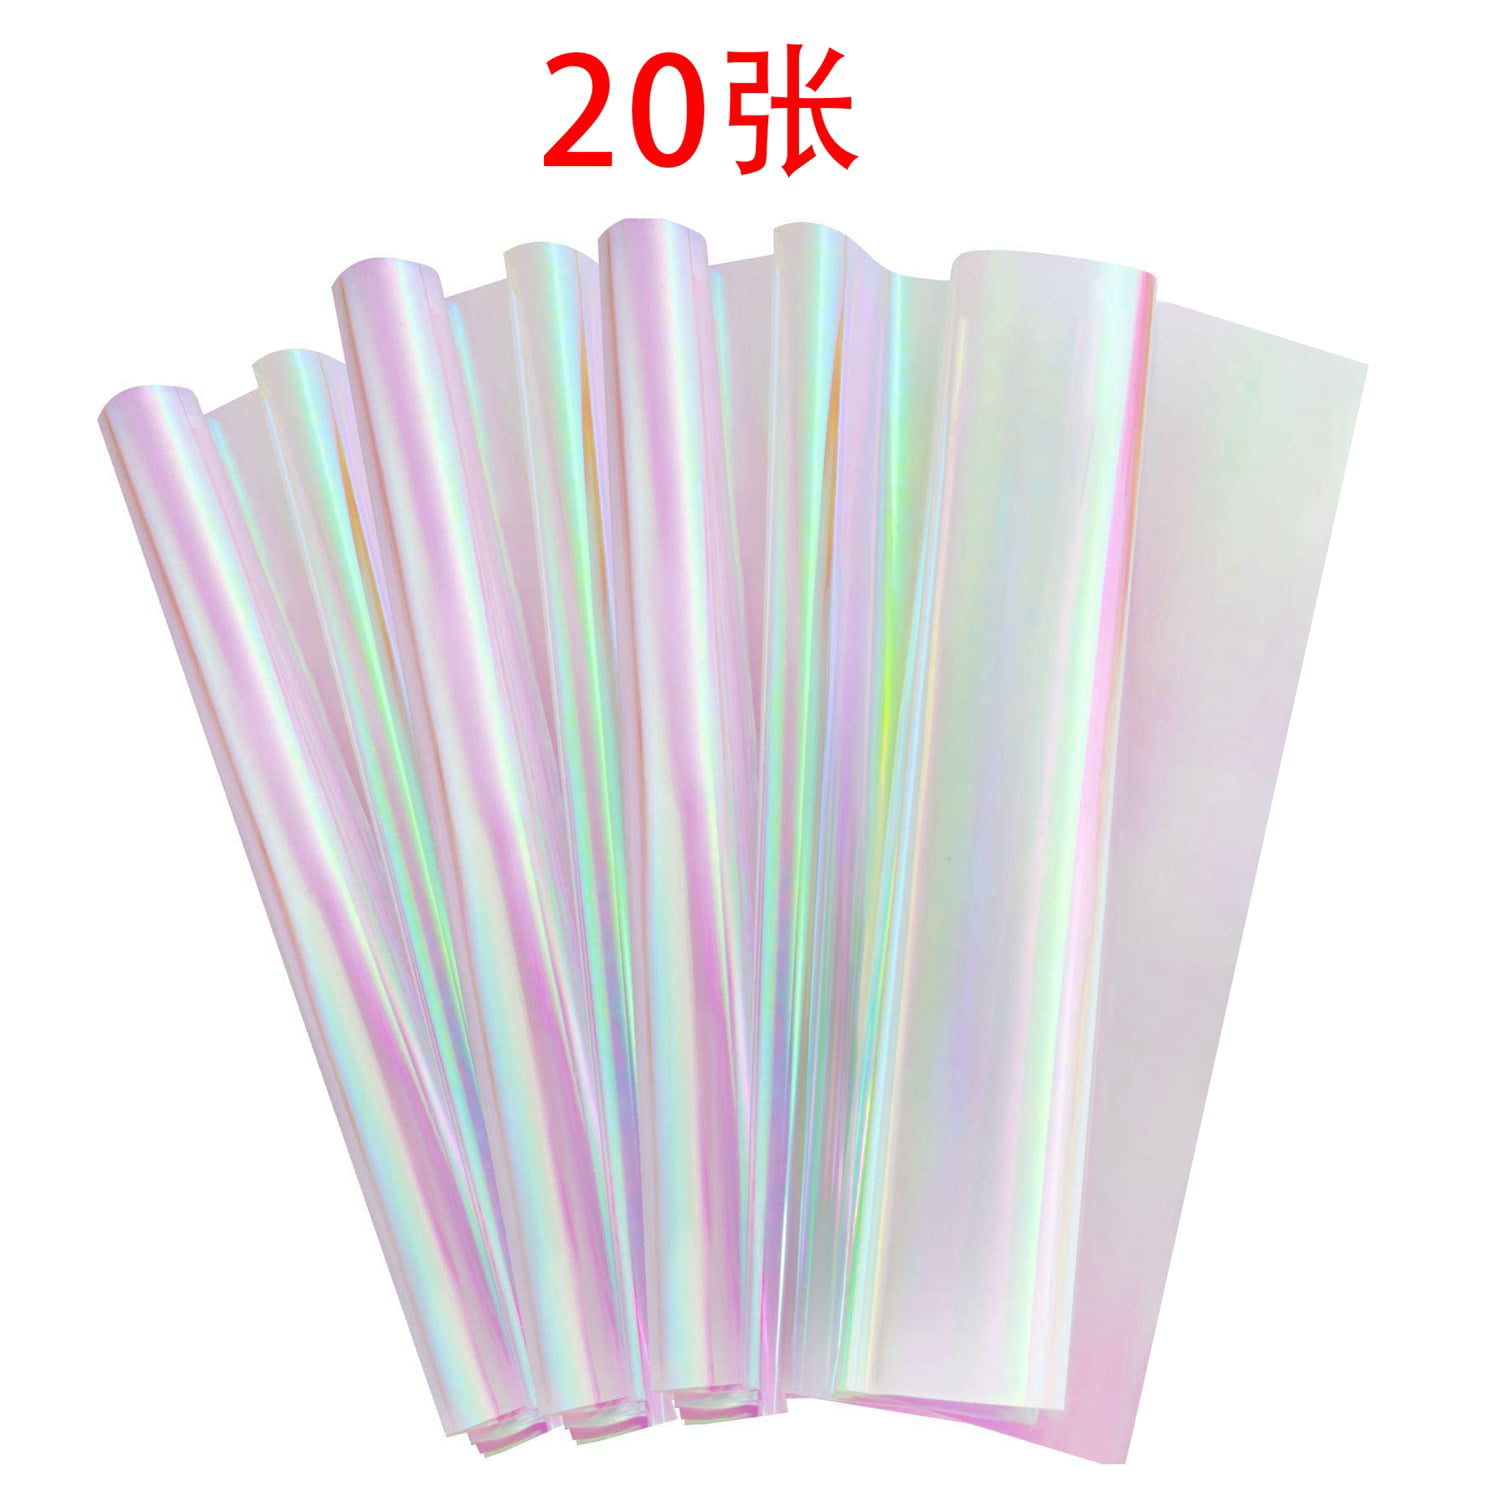 Dropship 20 Sheets Cellophane Flower Wrapping Paper Transparent